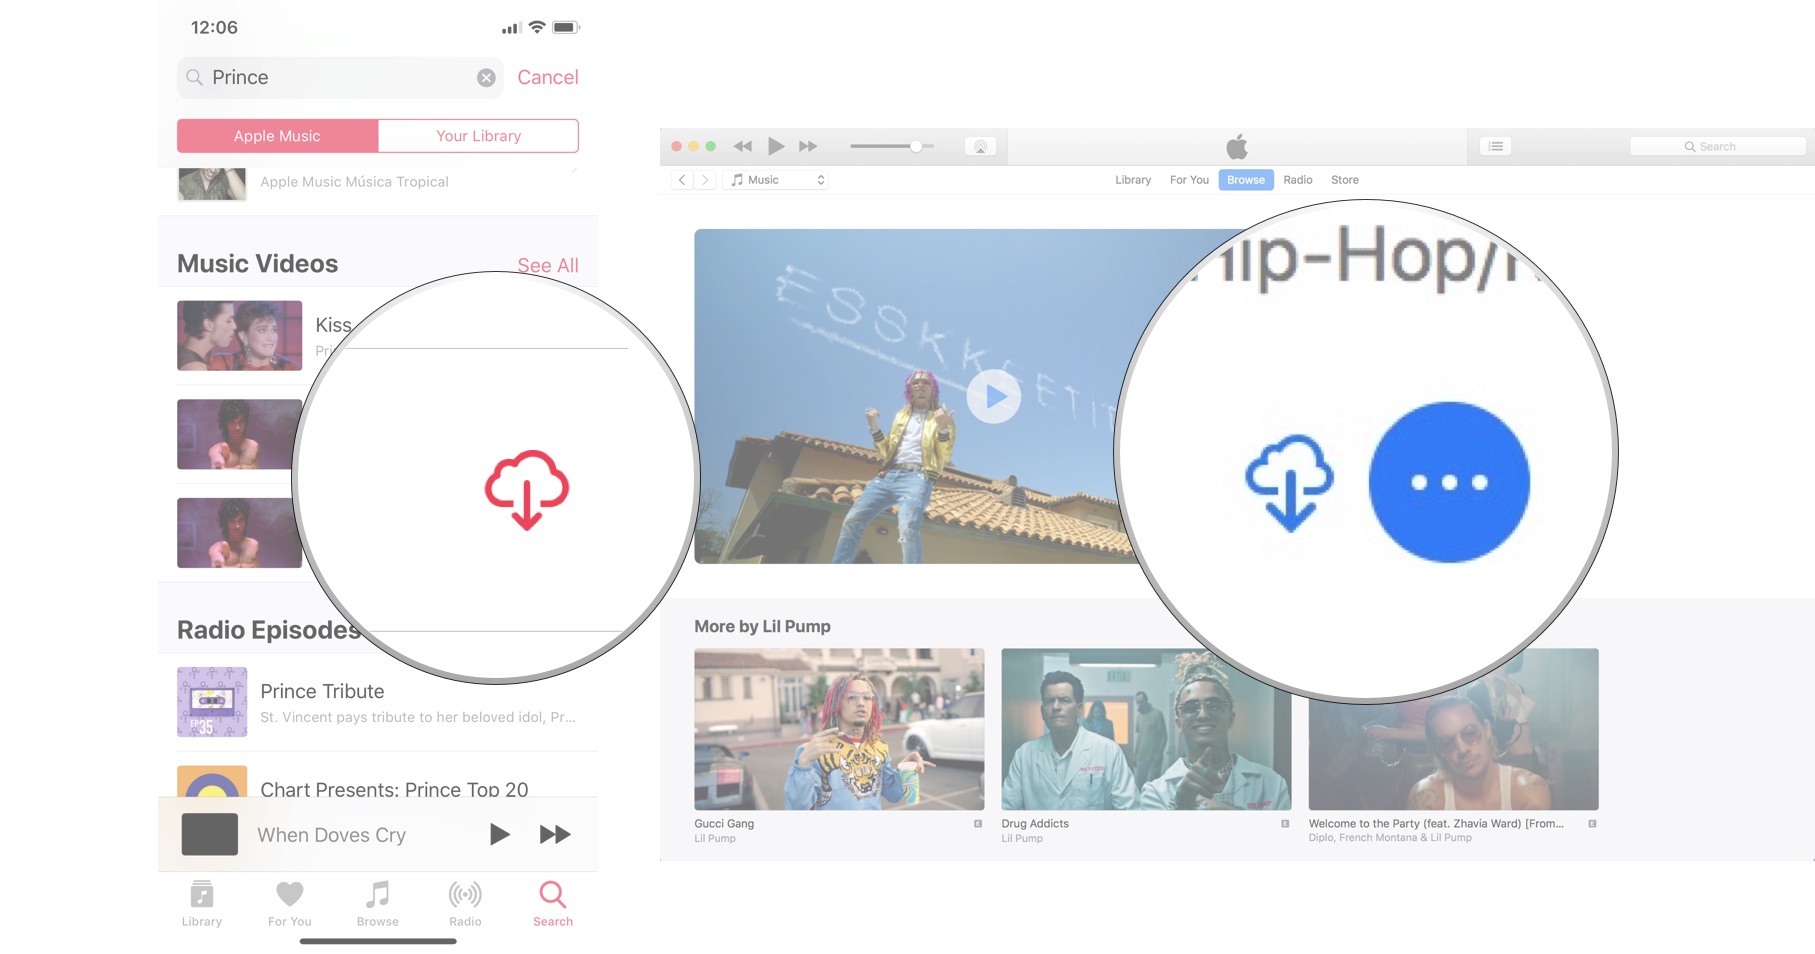 Downlaod music videos in Apple Music: Select the Download button